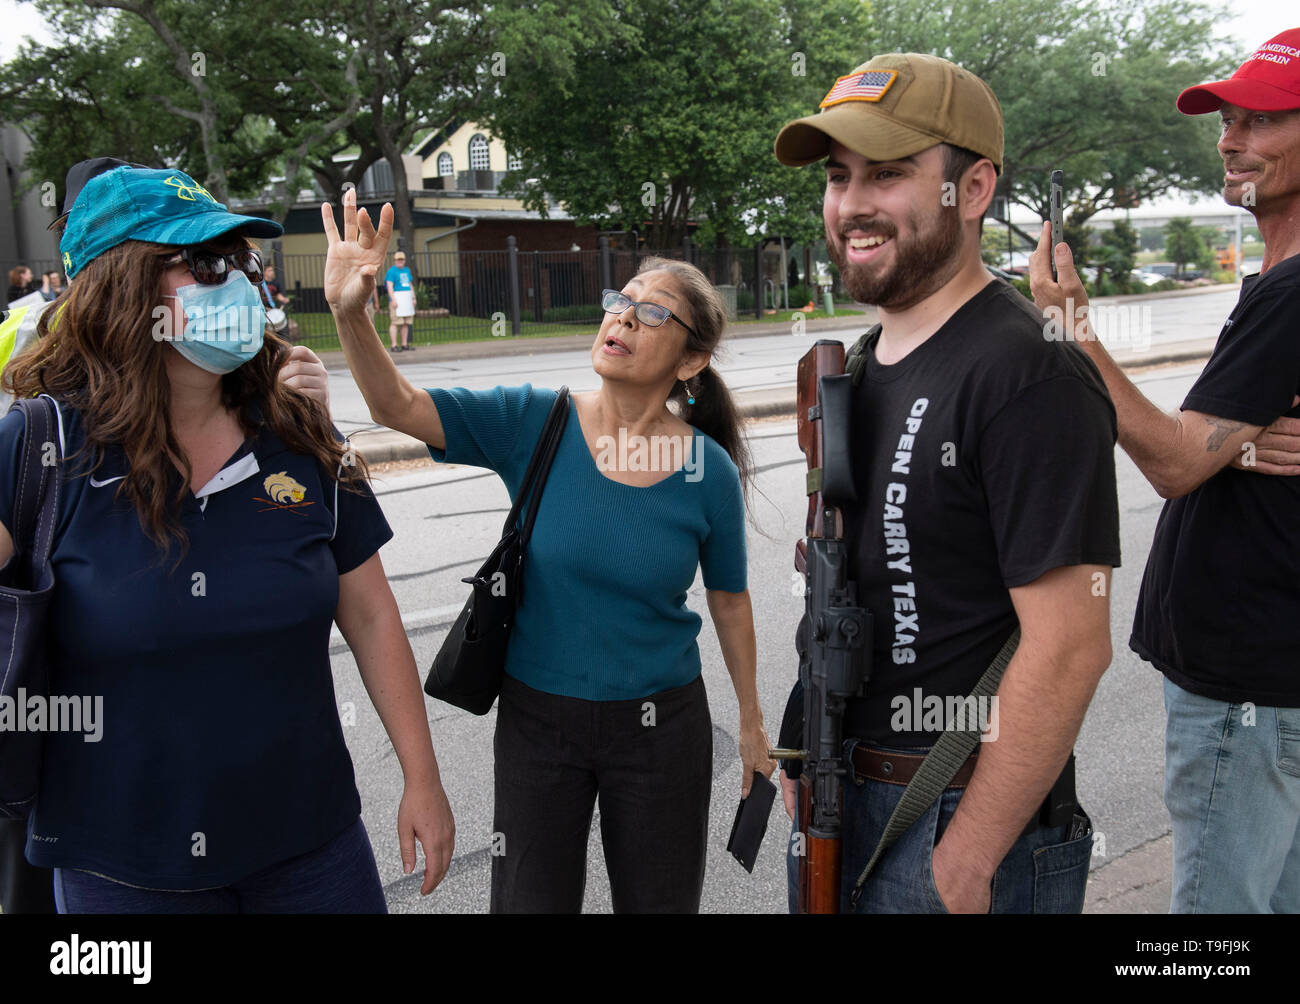 A supporter of Ilhan Omar (center) confronts anti-Muslim protesters, some opening carrying guns legally, outside an Austin, Texas, hotel where the controversial Muslim Congresswoman spoke at a city-wide iftar dinner. Stock Photo